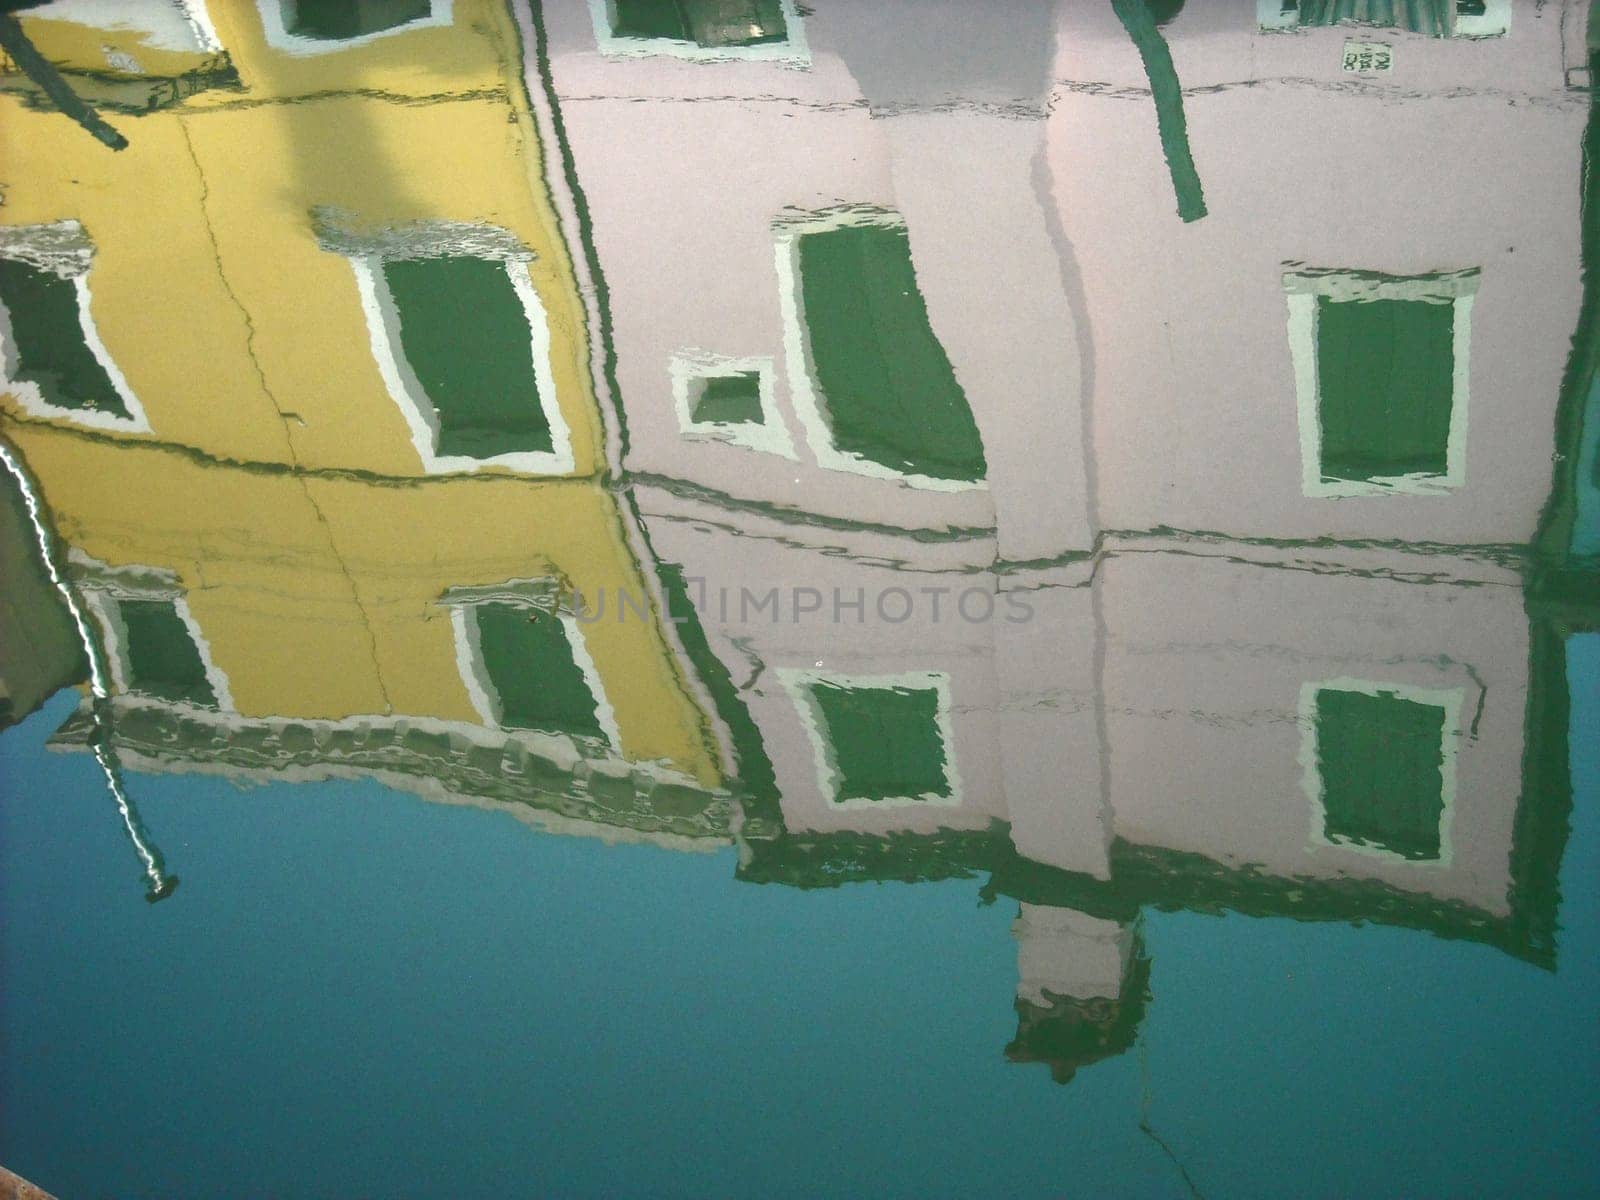 The characteristic colored houses of Burano (Venice) reflected on the water of a canal